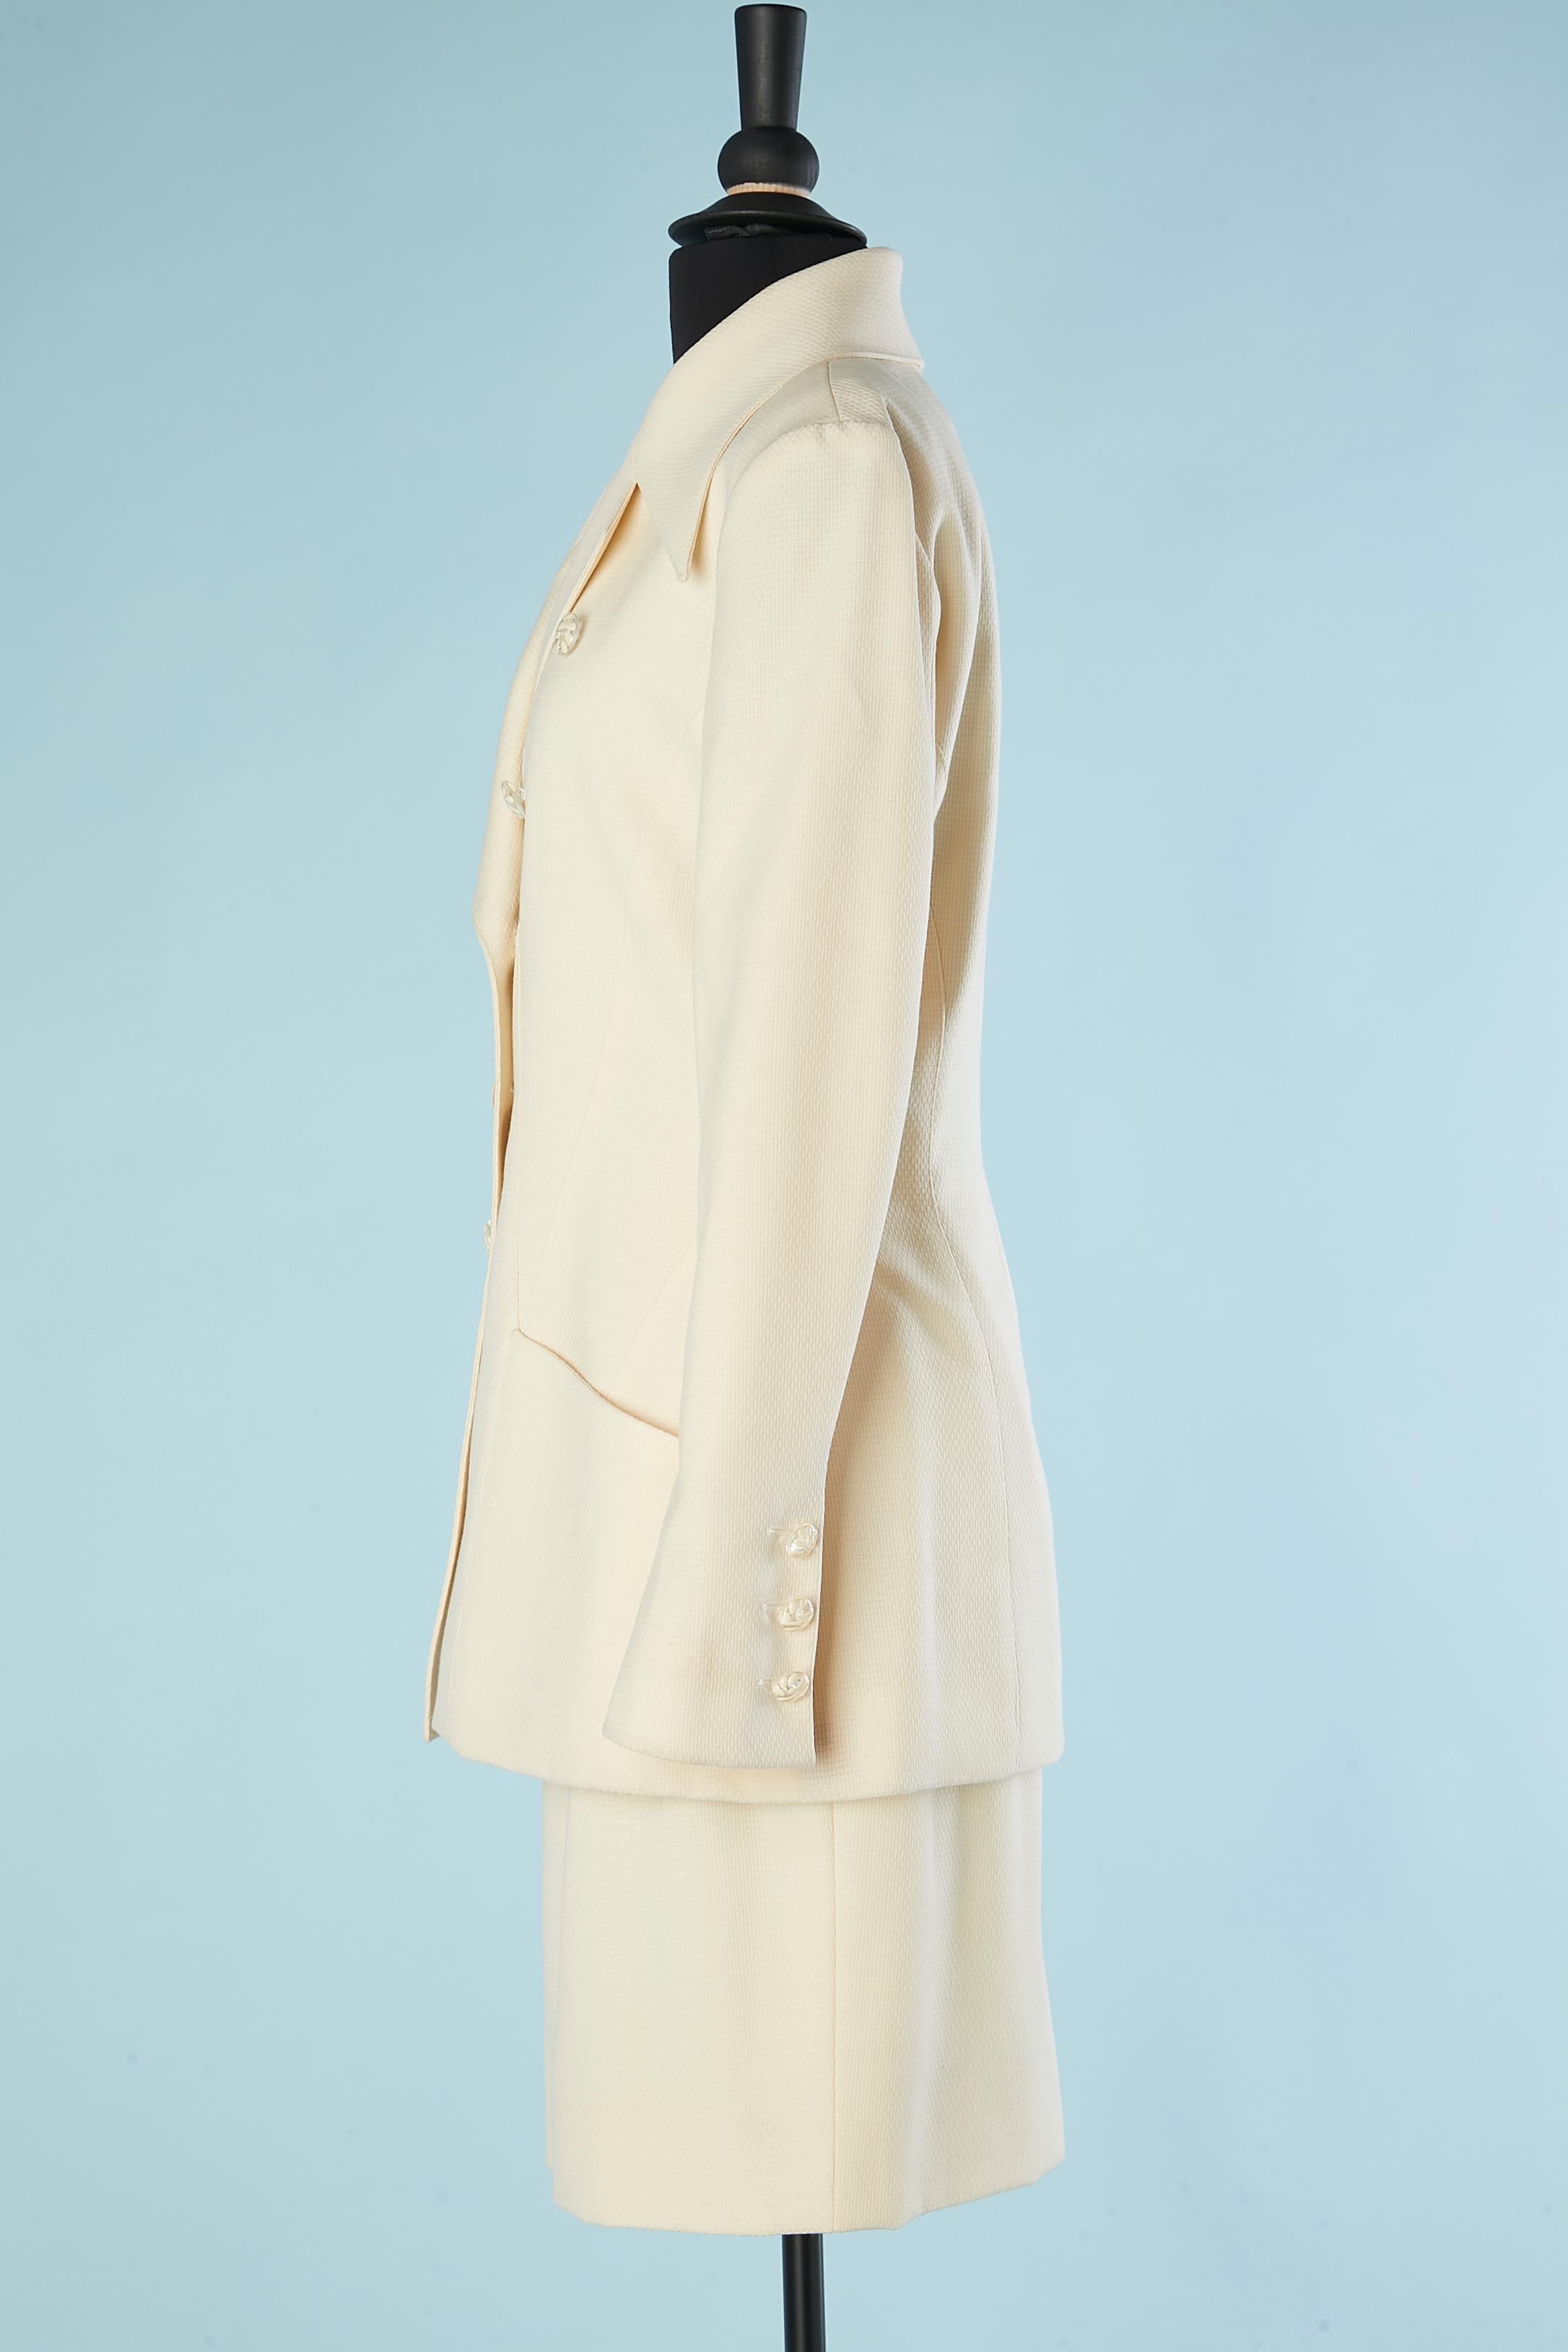 Off-white skirt suit Karl Lagerfeld for Neiman Marcus  In Excellent Condition For Sale In Saint-Ouen-Sur-Seine, FR